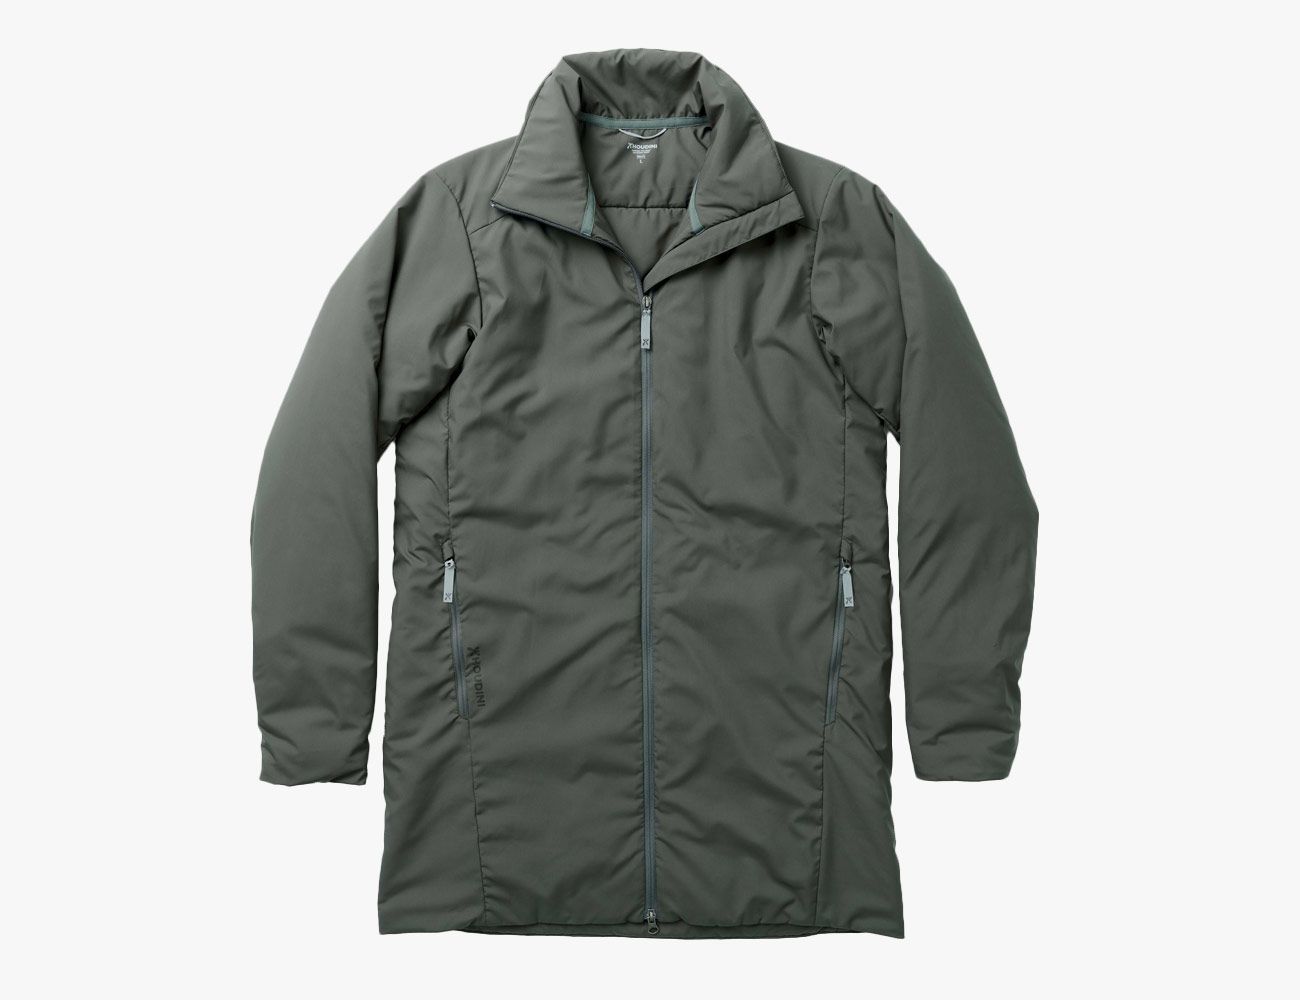 The 12 Best Synthetic Down Jackets of 2022